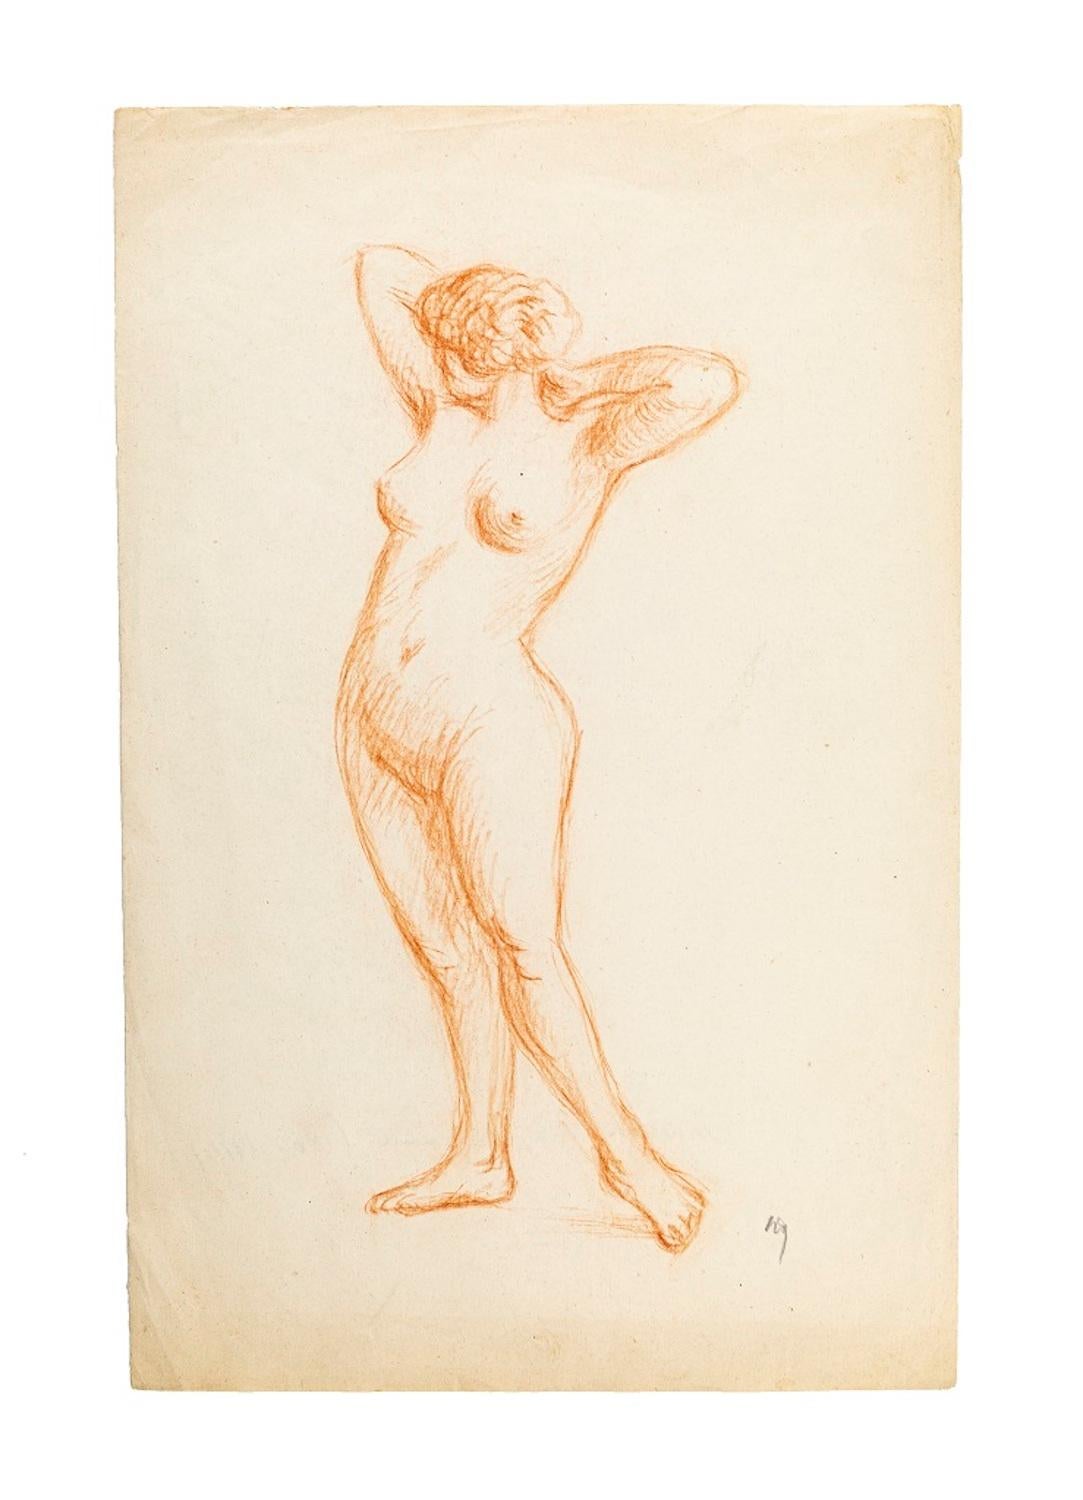 Oswald Heidbrink Nude - Naked Woman - Original Pencil Drawing Late 19th Century